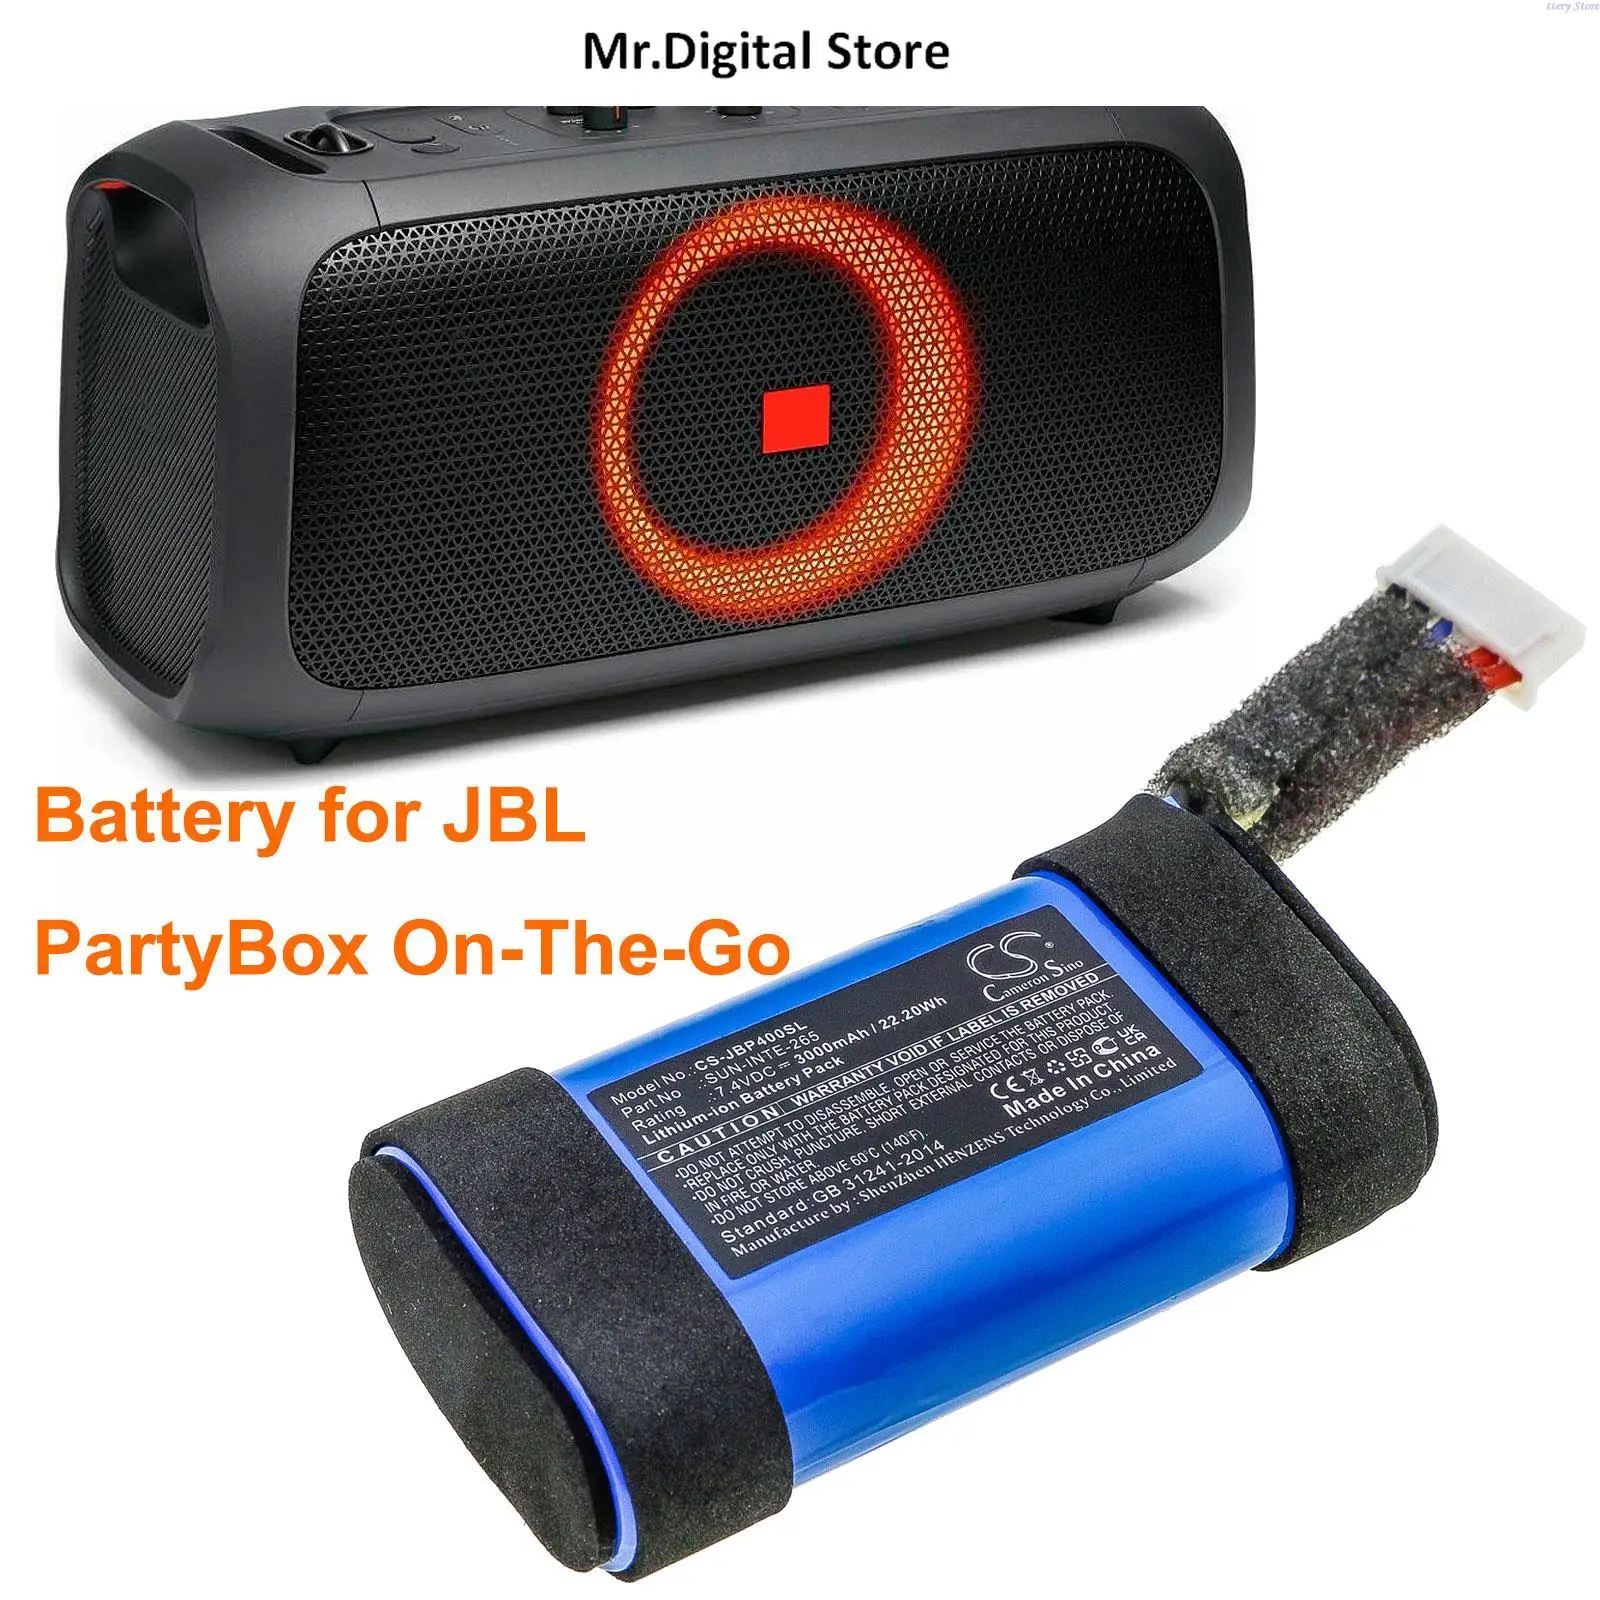 

Cameron Sino 3000mAh Speaker Battery for JBL PartyBox On-The-Go, OnTheGo, On The Go